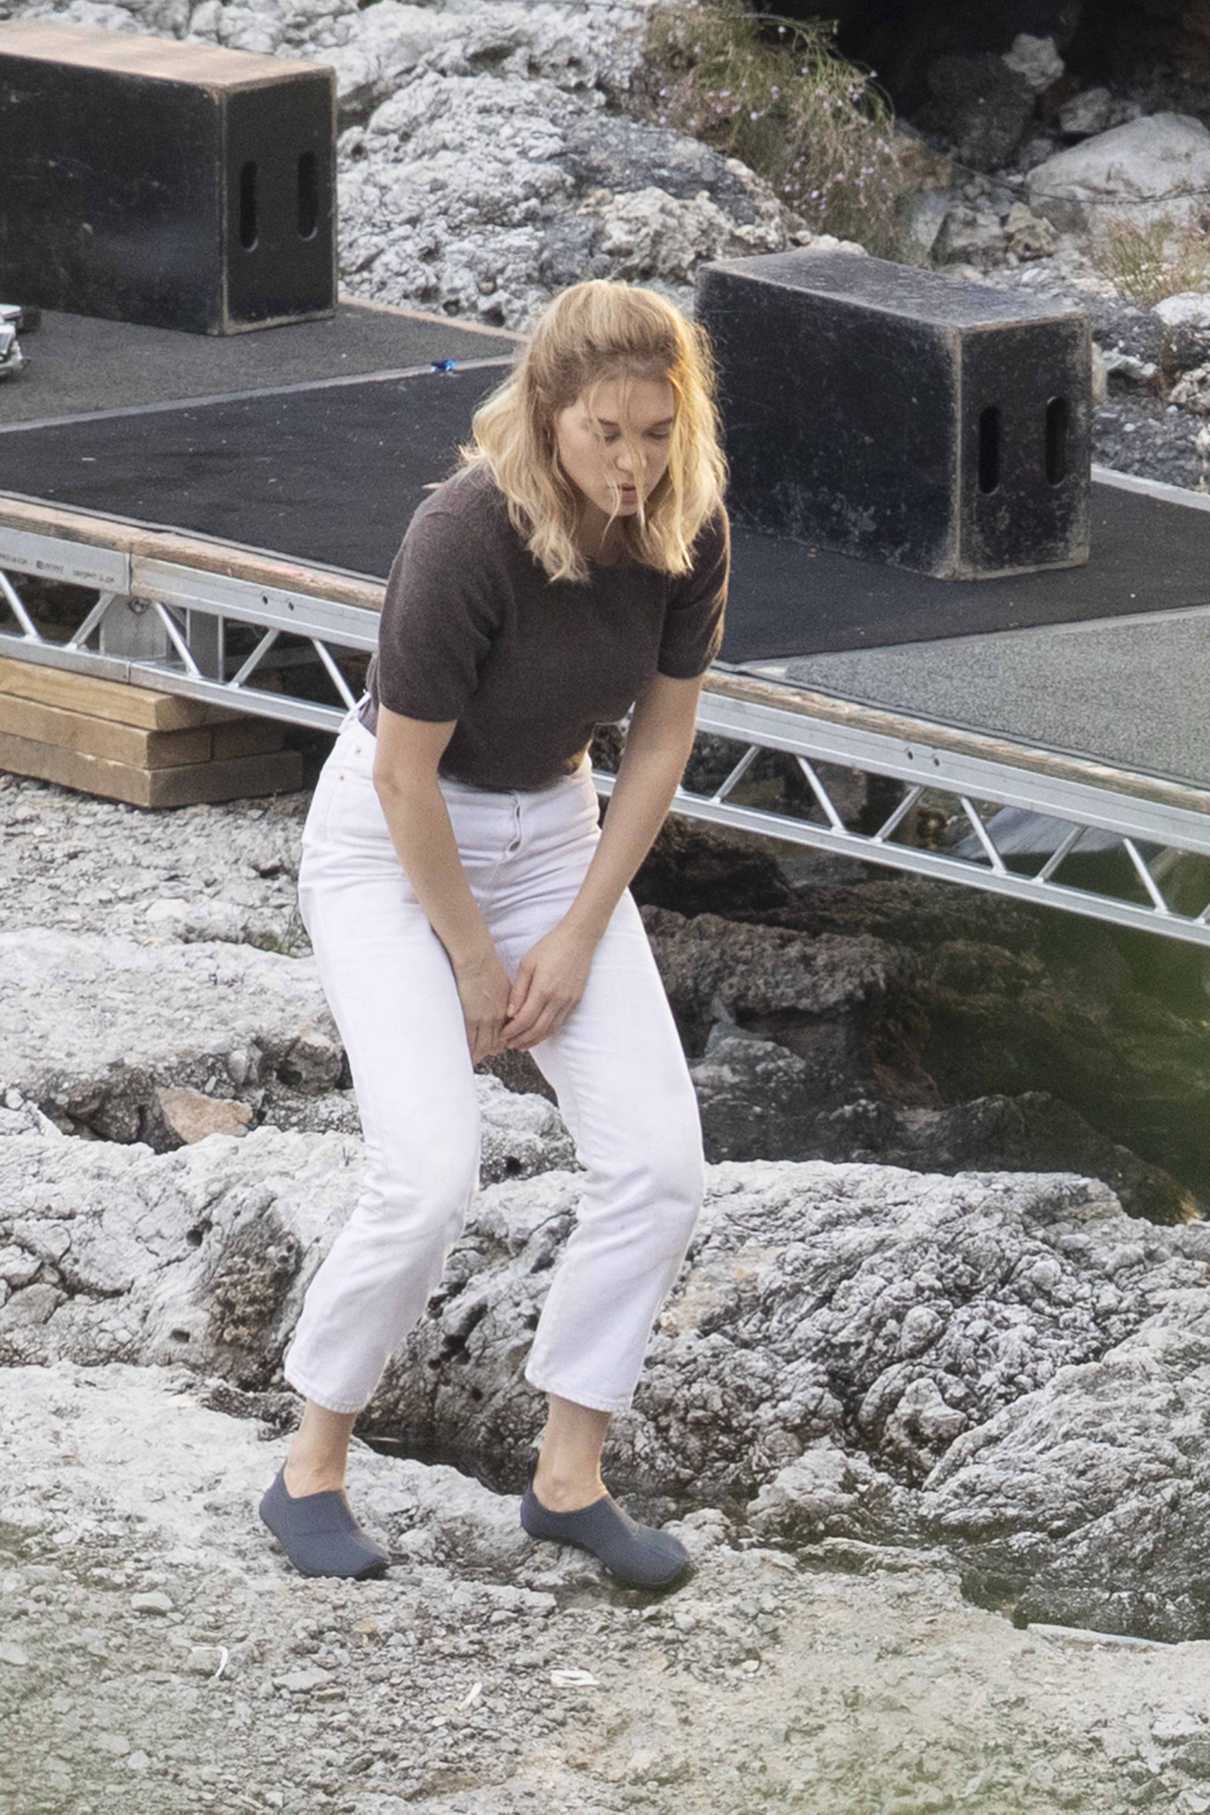 lea-seydoux-in-a-brown-tee-on-the-set-of-james-bond-no-time-to-die-in-southern-italy-09-26-2019-2.jpg